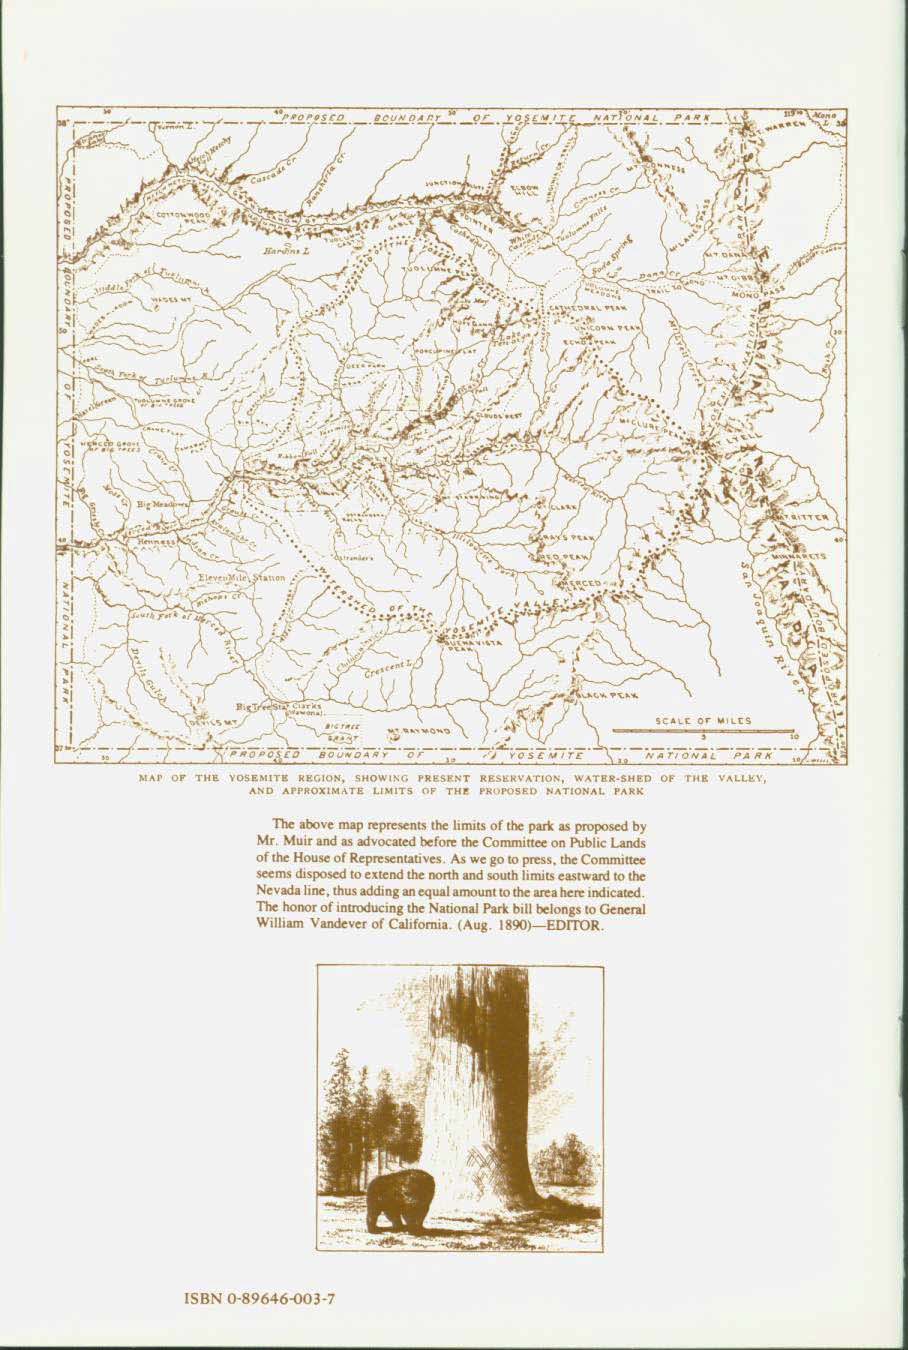 The Proposed Yosemite National Park--treasures & features, 1890. vis0003backcover